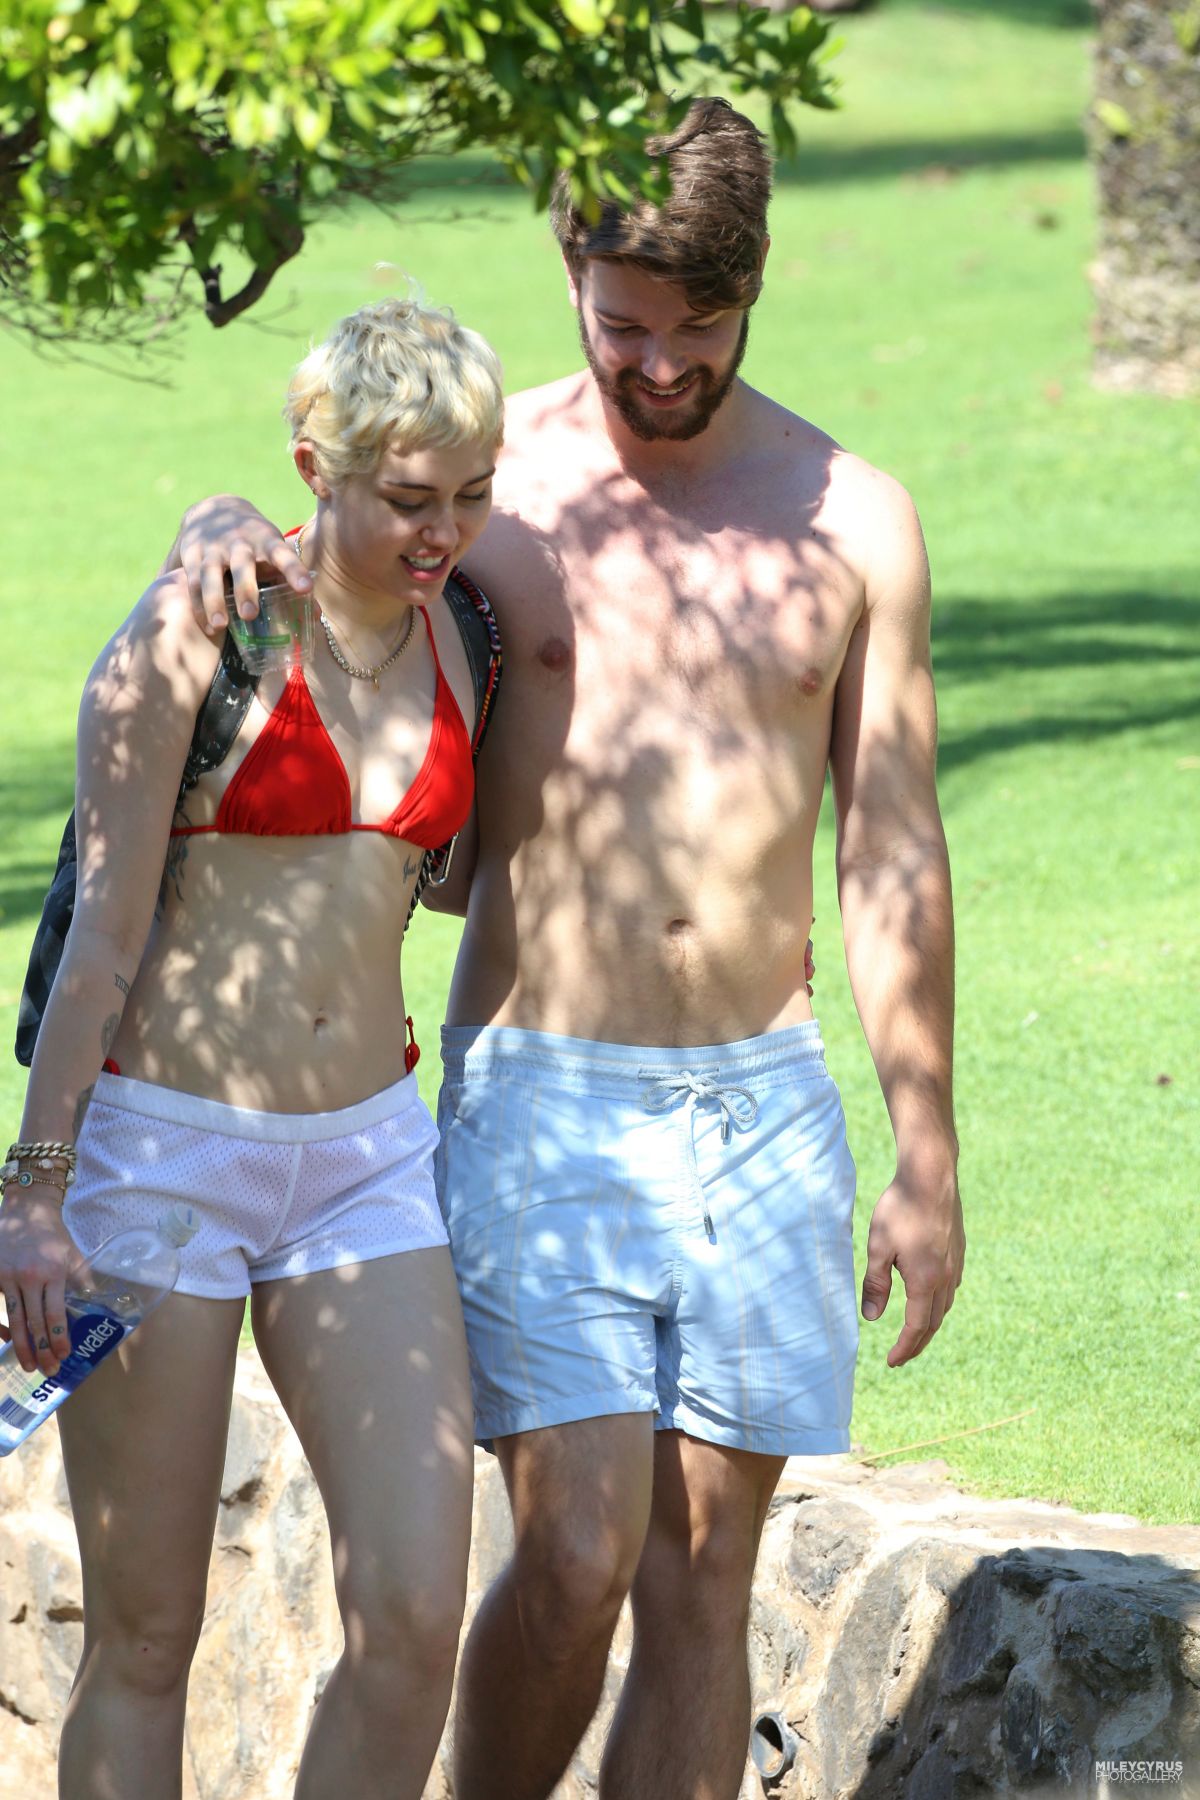 https://www.hawtcelebs.com/wp-content/uploads/2015/01/miley-cyrus-and-patrick-schwarzenegger-on-vacation-in-hawaii_12.jpg